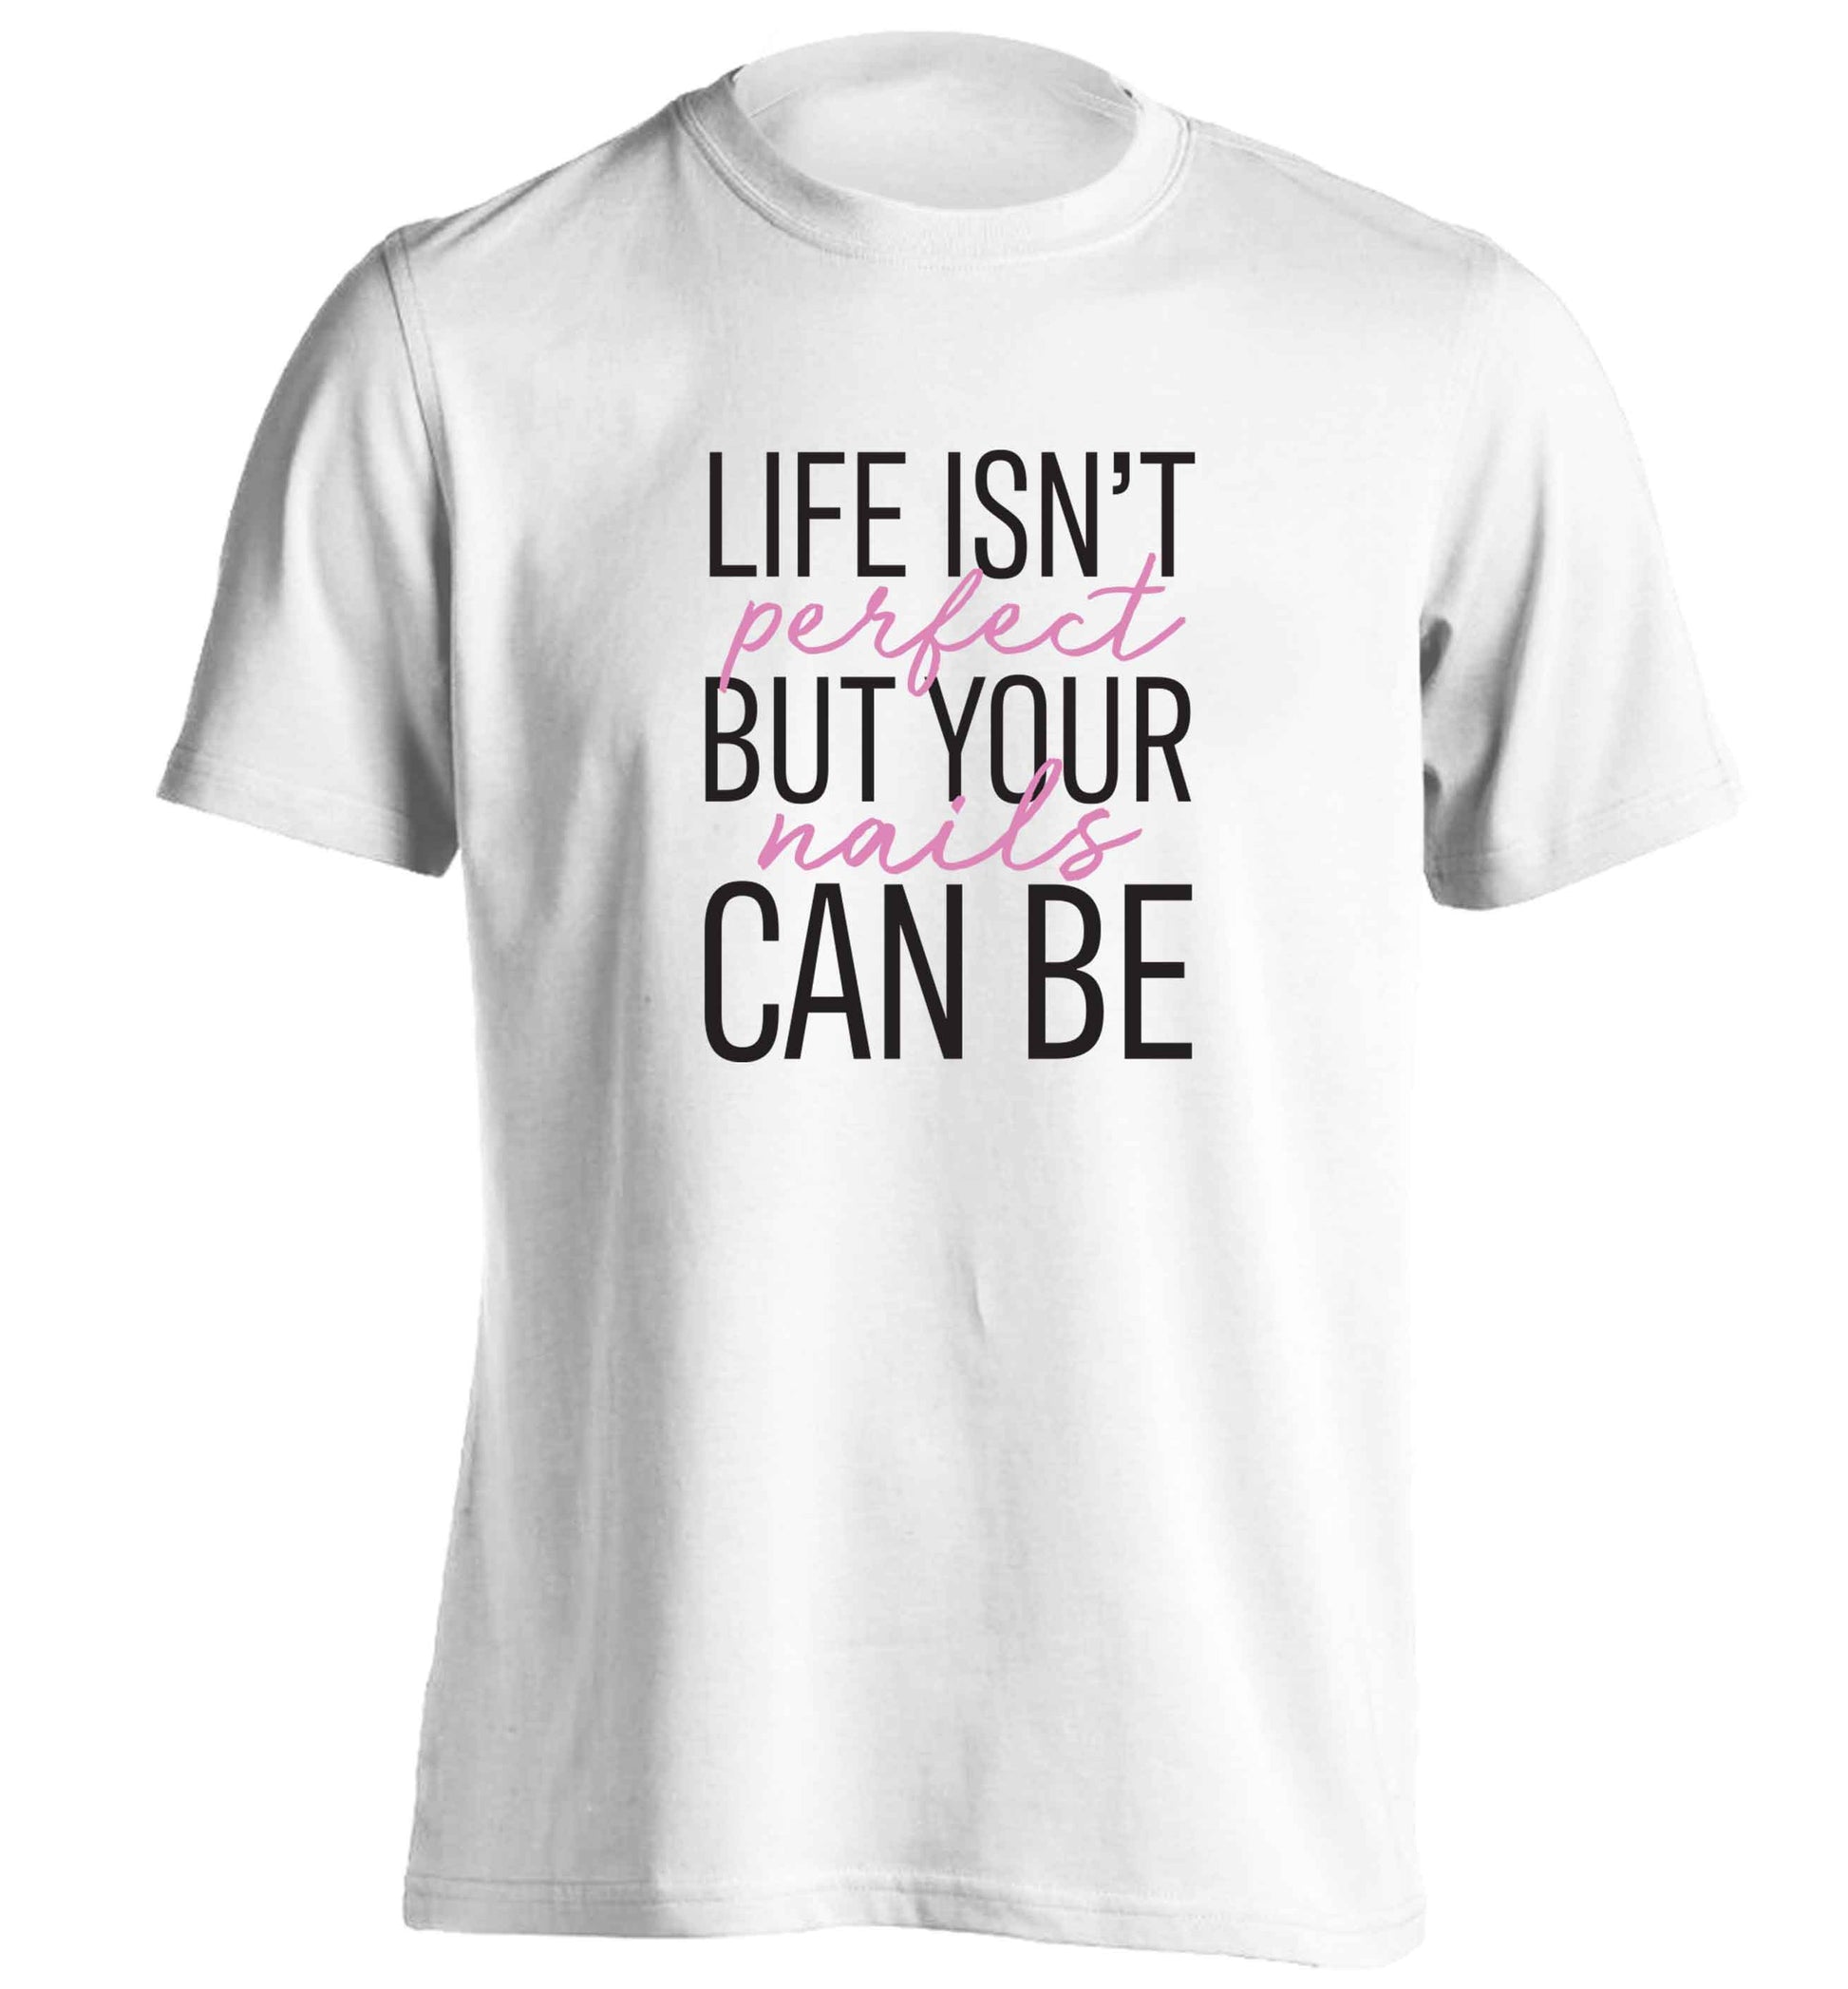 Life isn't perfect but your nails can be adults unisex white Tshirt 2XL